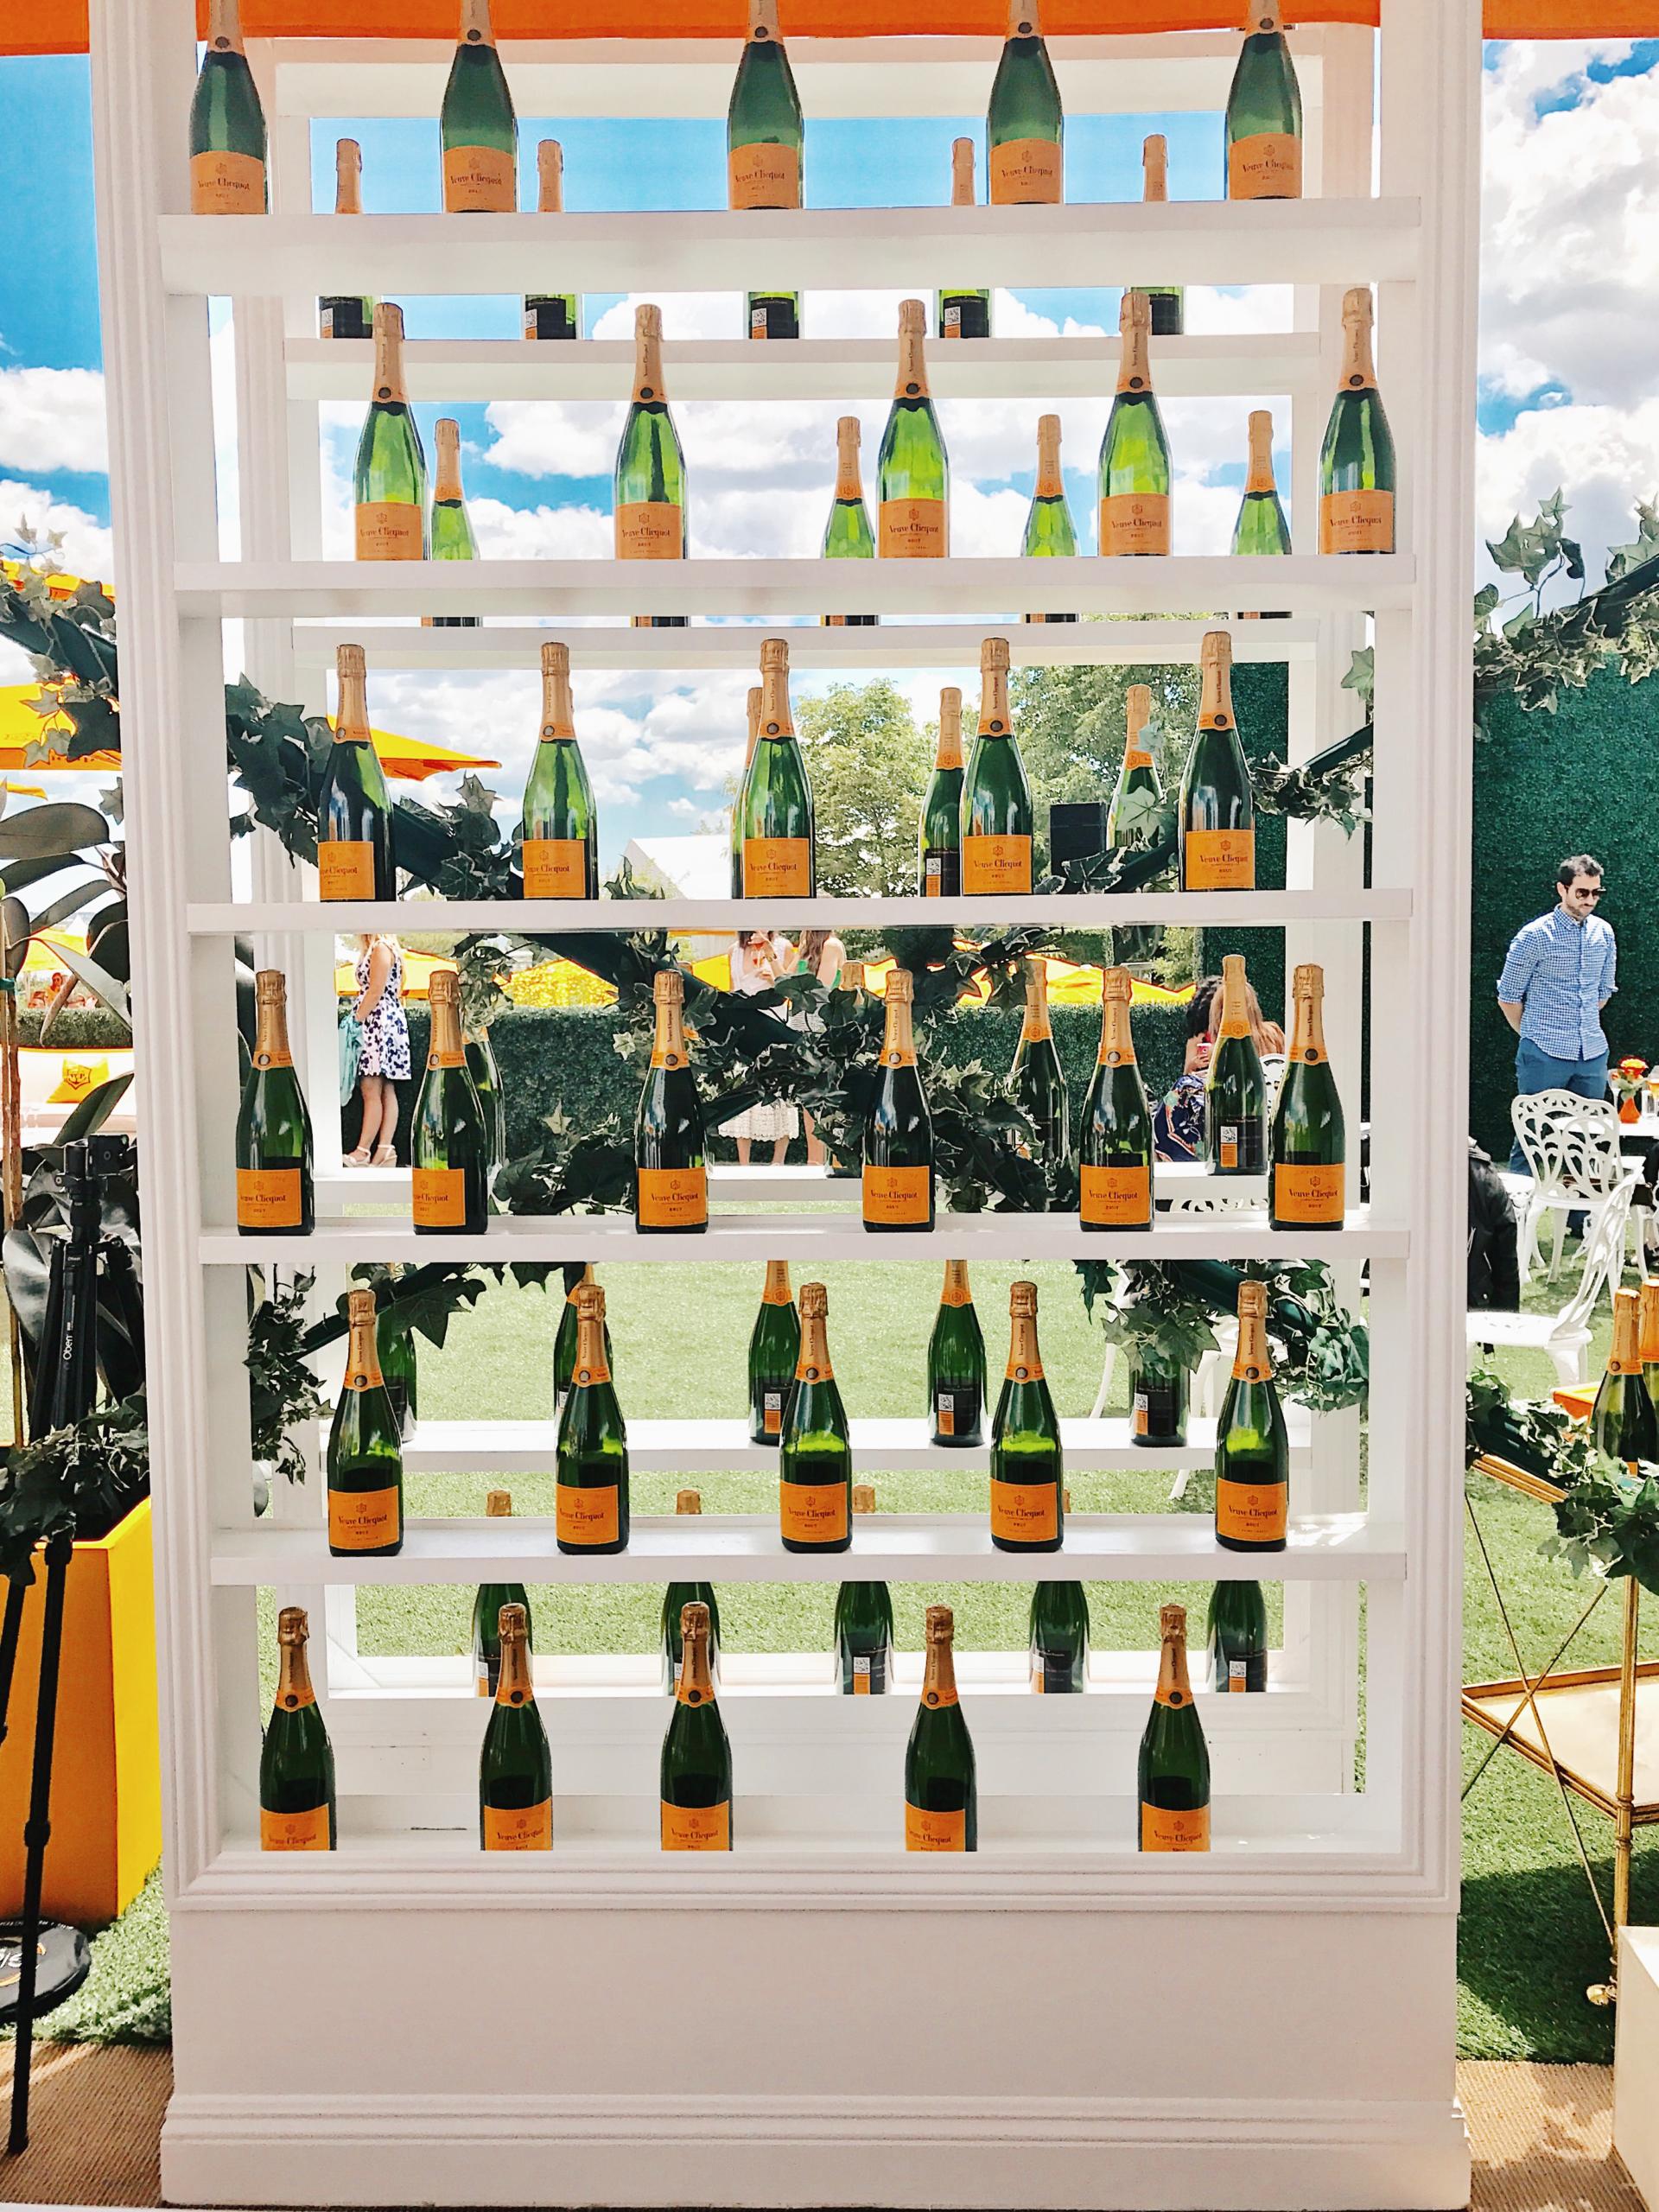 Weekend Recap: In NYC with Veuve Clicquot - The Girl from Panama